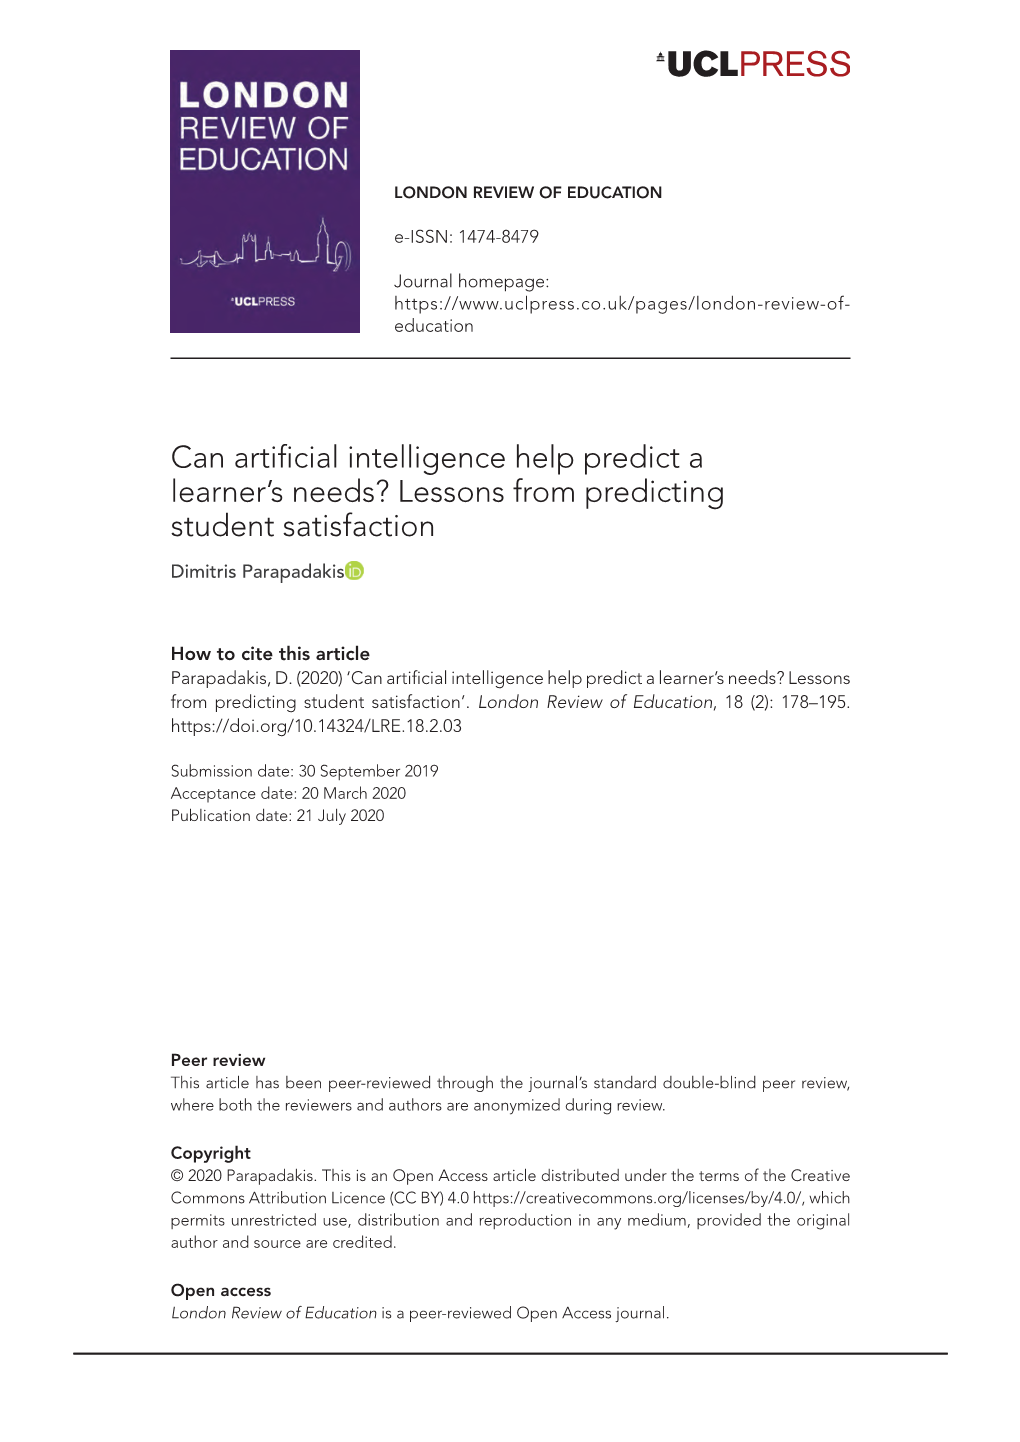 Can Artificial Intelligence Help Predict a Learner's Needs? Lessons From